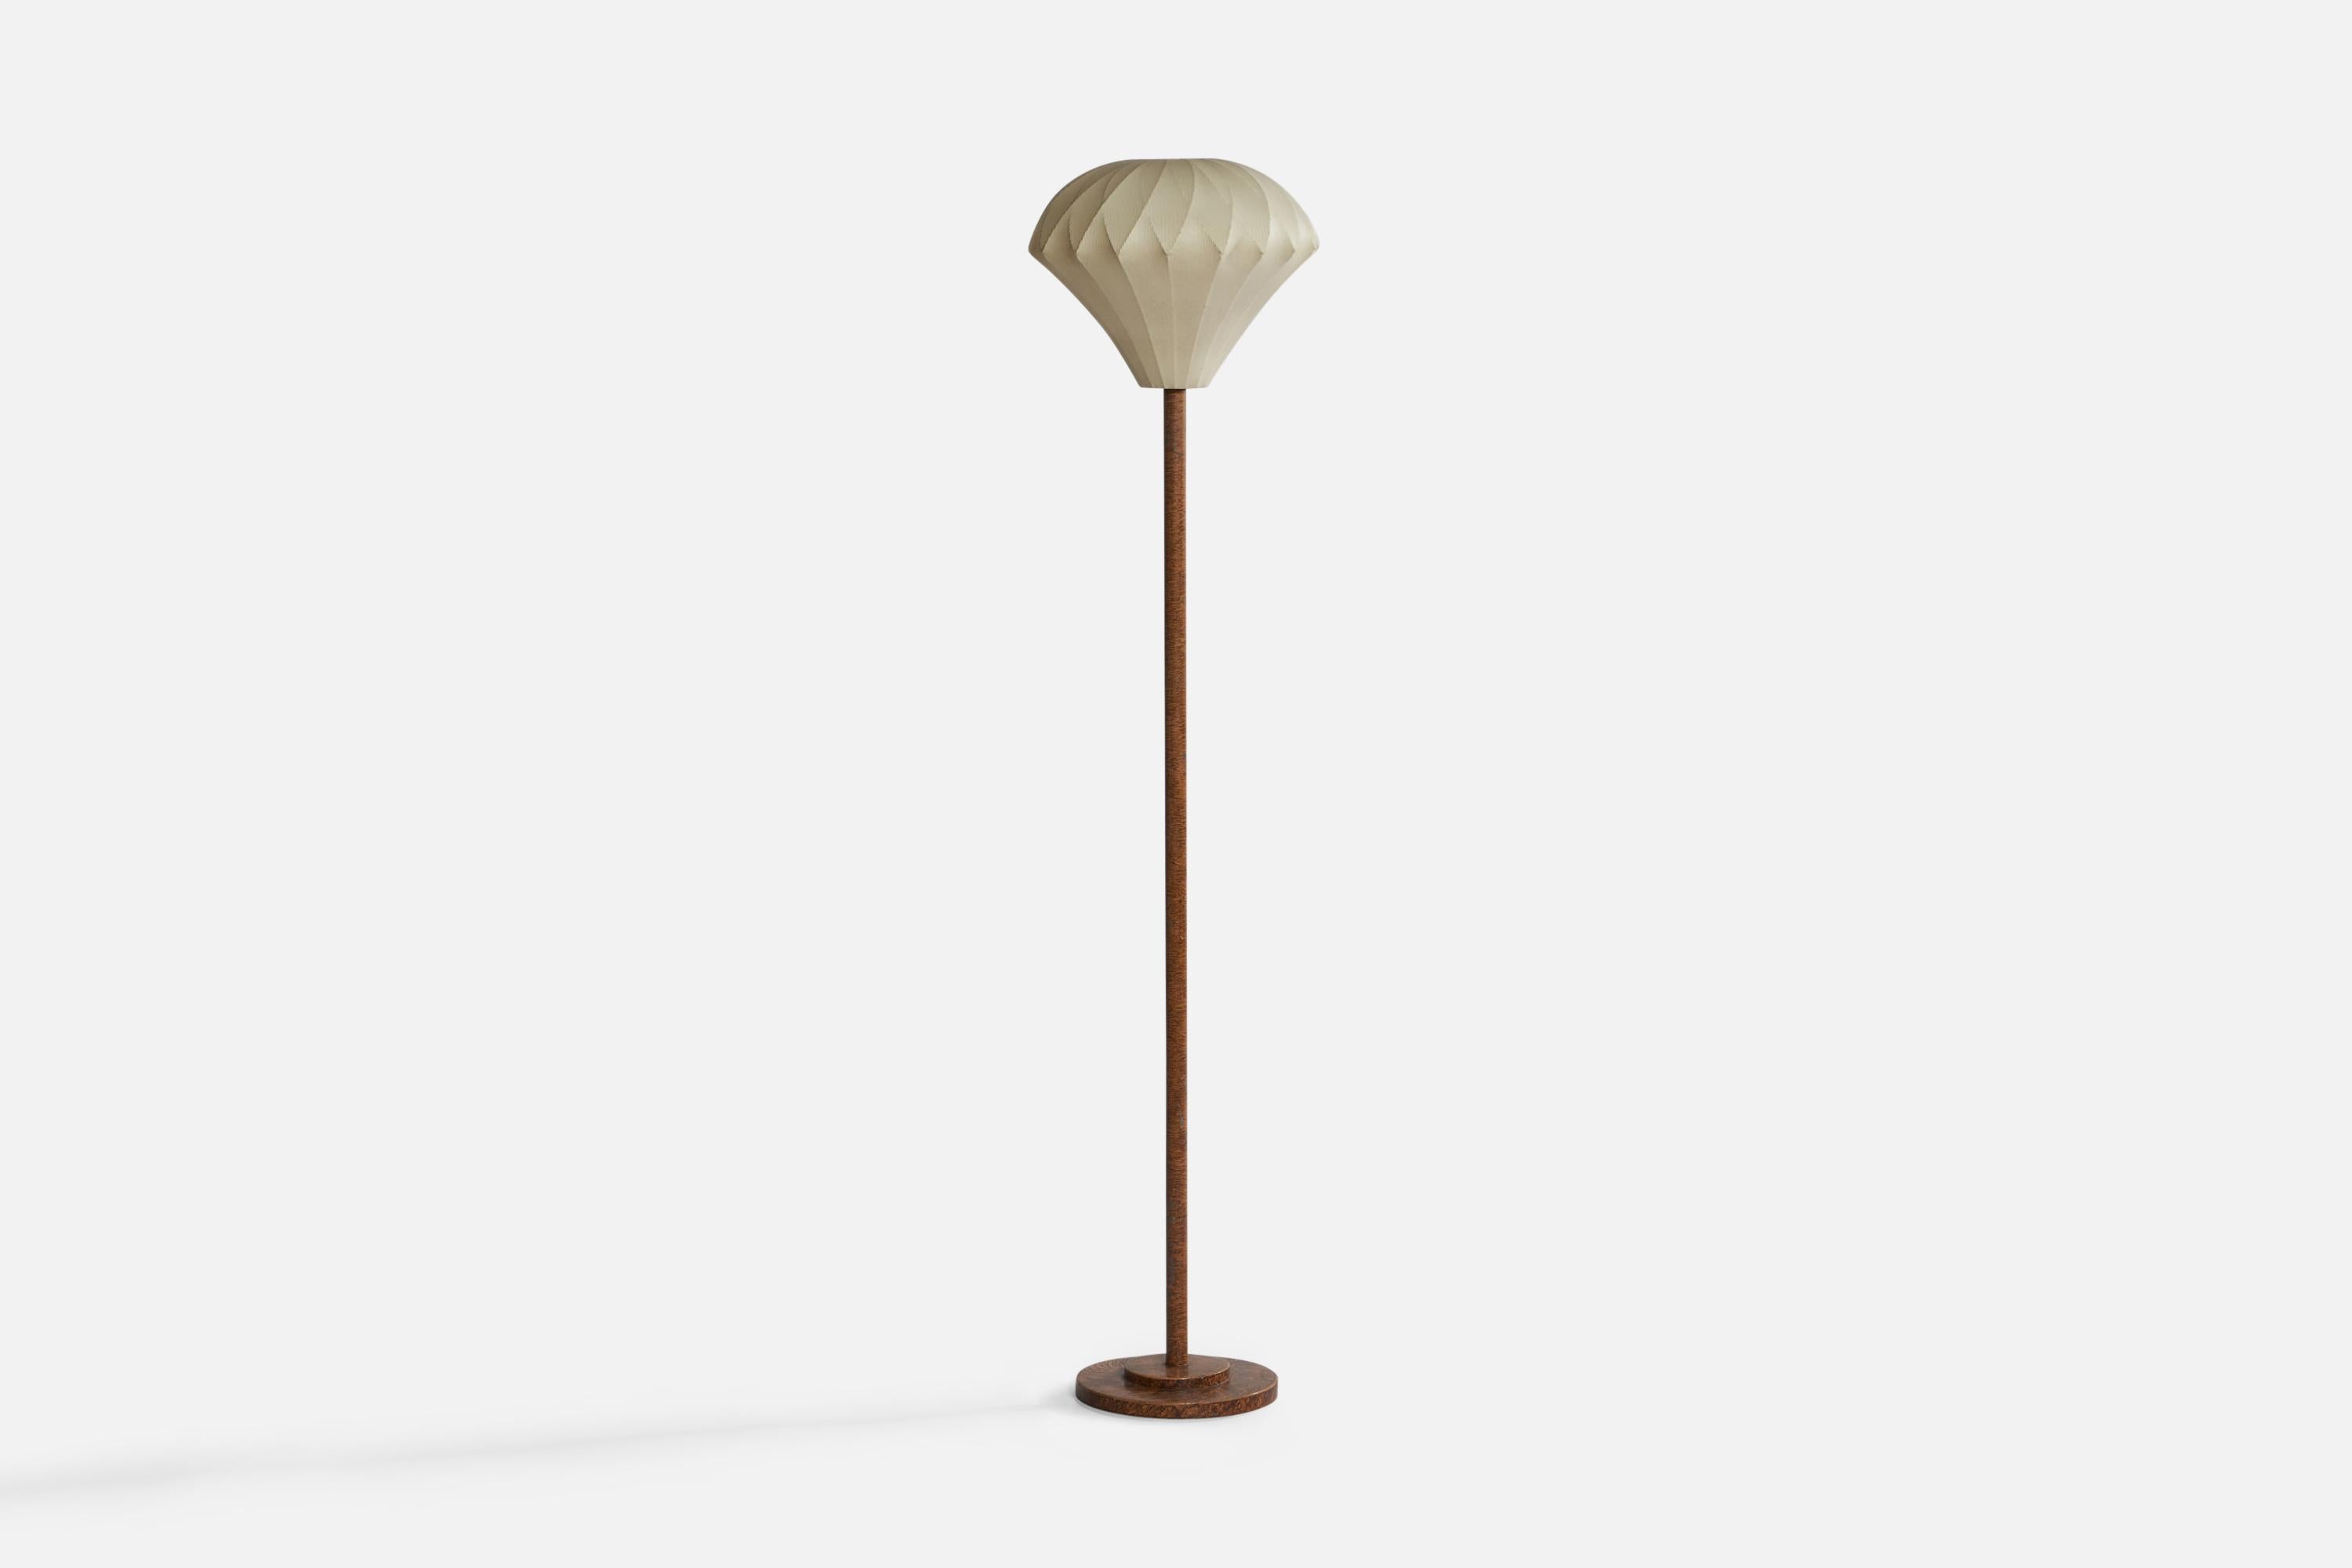 A trompe l'oeil style hand-painted cast iron and waxed fabric floor lamp designed and produced in Sweden, 1930s.

Overall Dimensions (inches): 58.25” H x 12.5” Diameter. Stated dimensions include shade.
Bulb Specifications: E-26 Bulb
Number of